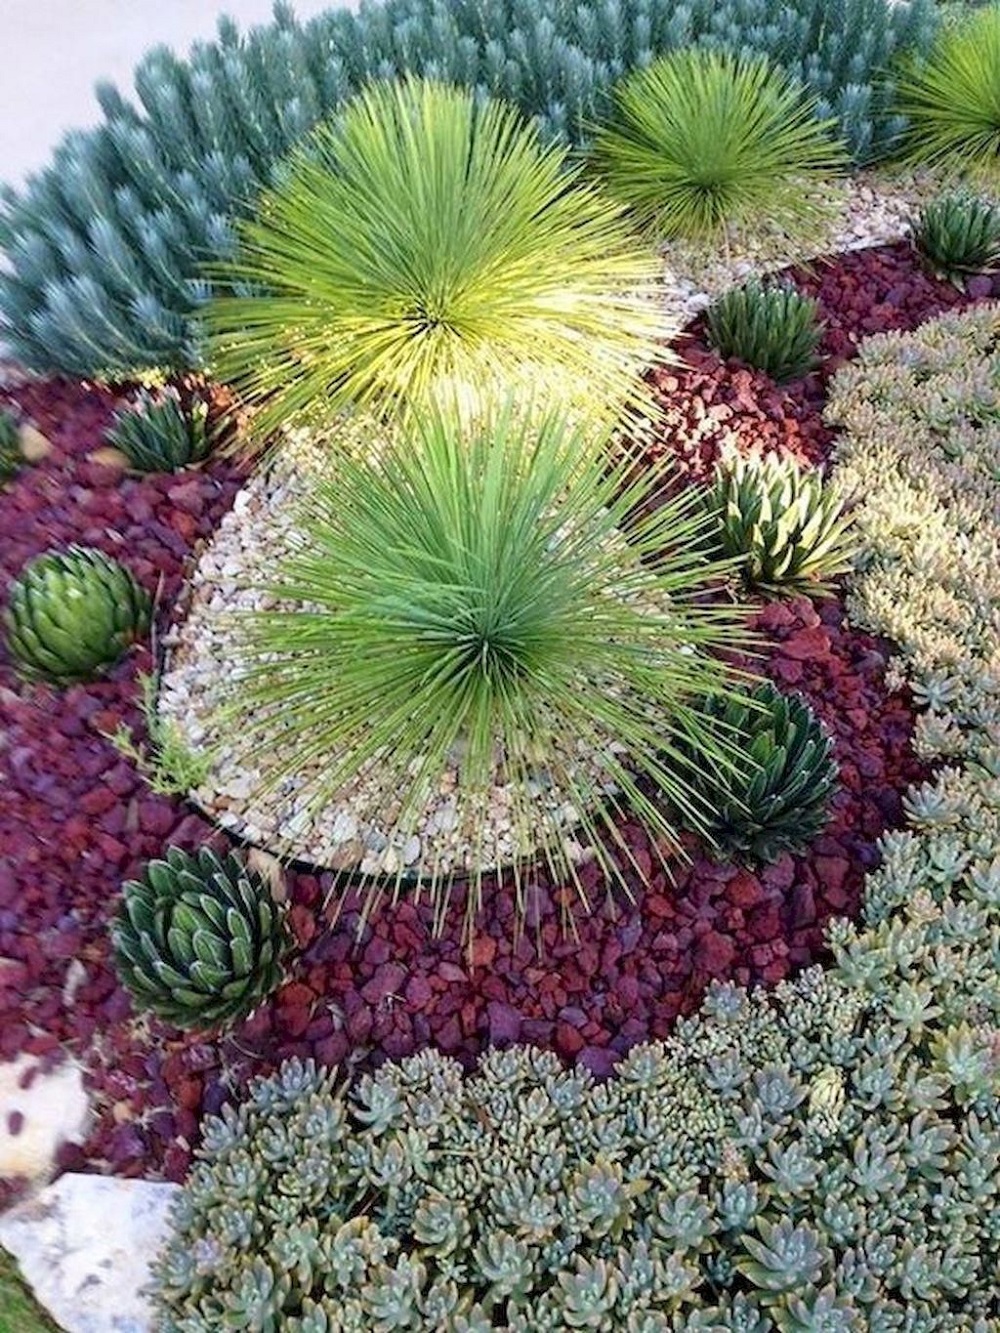 t1-2 Amazing cactus garden ideas to try out for your garden